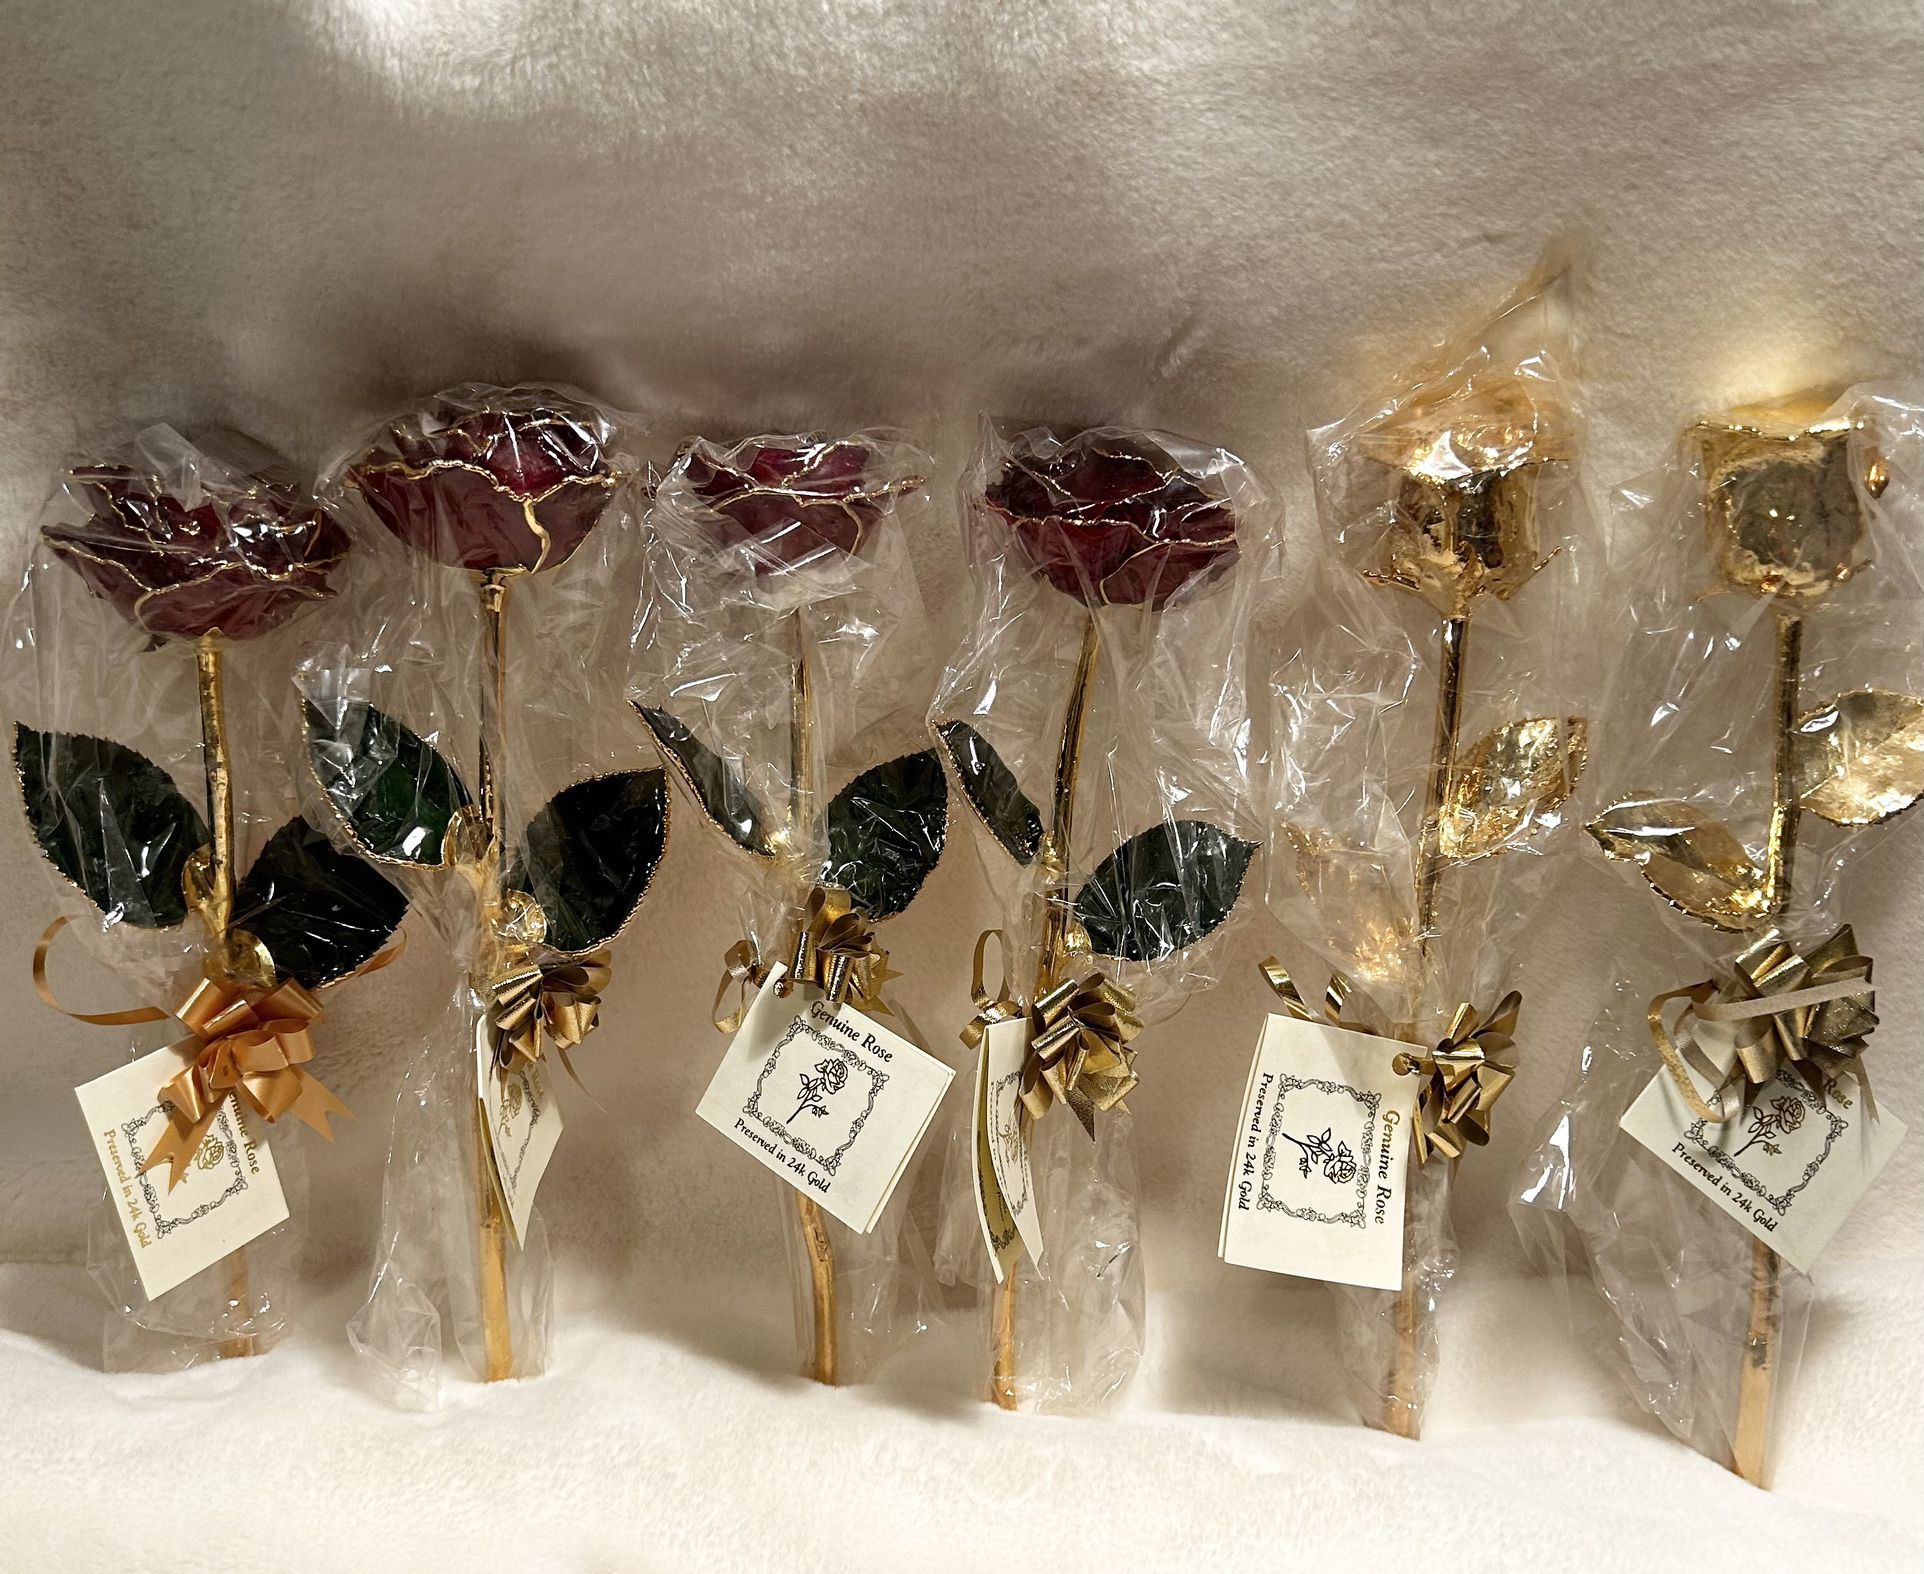 $80 EACH ROSE PRESERVED IN 24KT GOLD 47th Ave., and Dobbins in Laveen